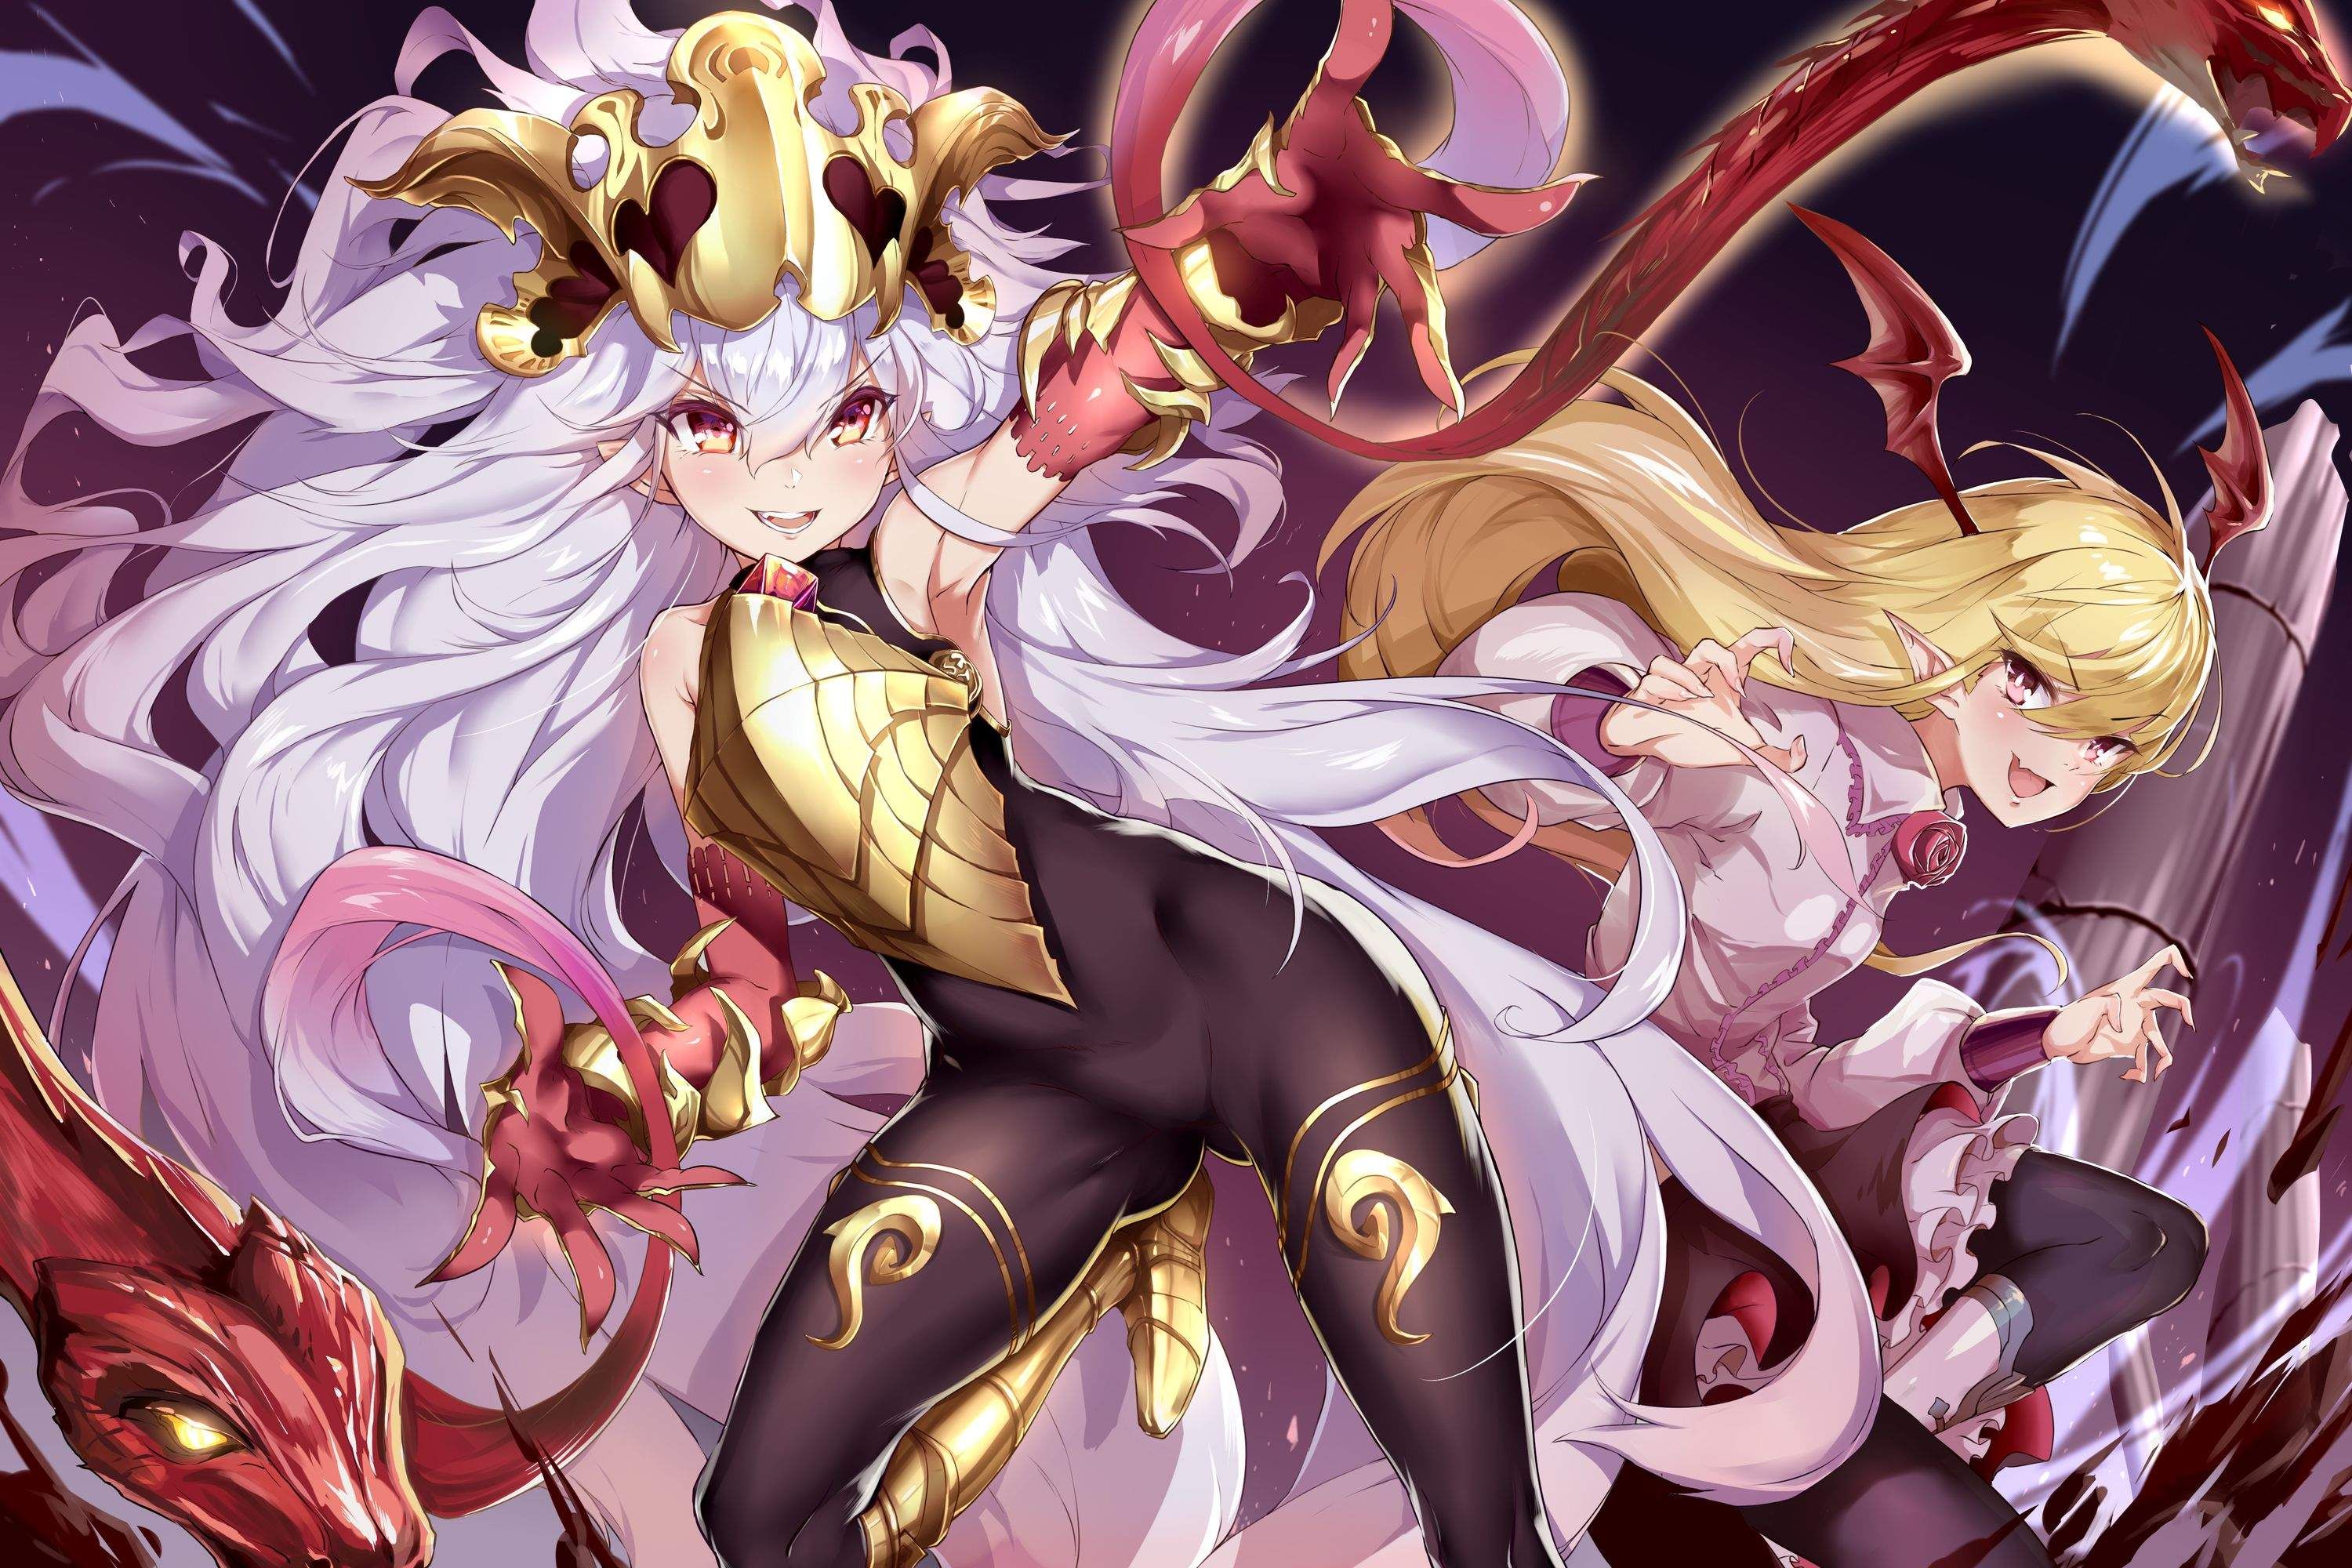 [Gran Blue Fantasy] you want to see a naughty image of Medusa? 5